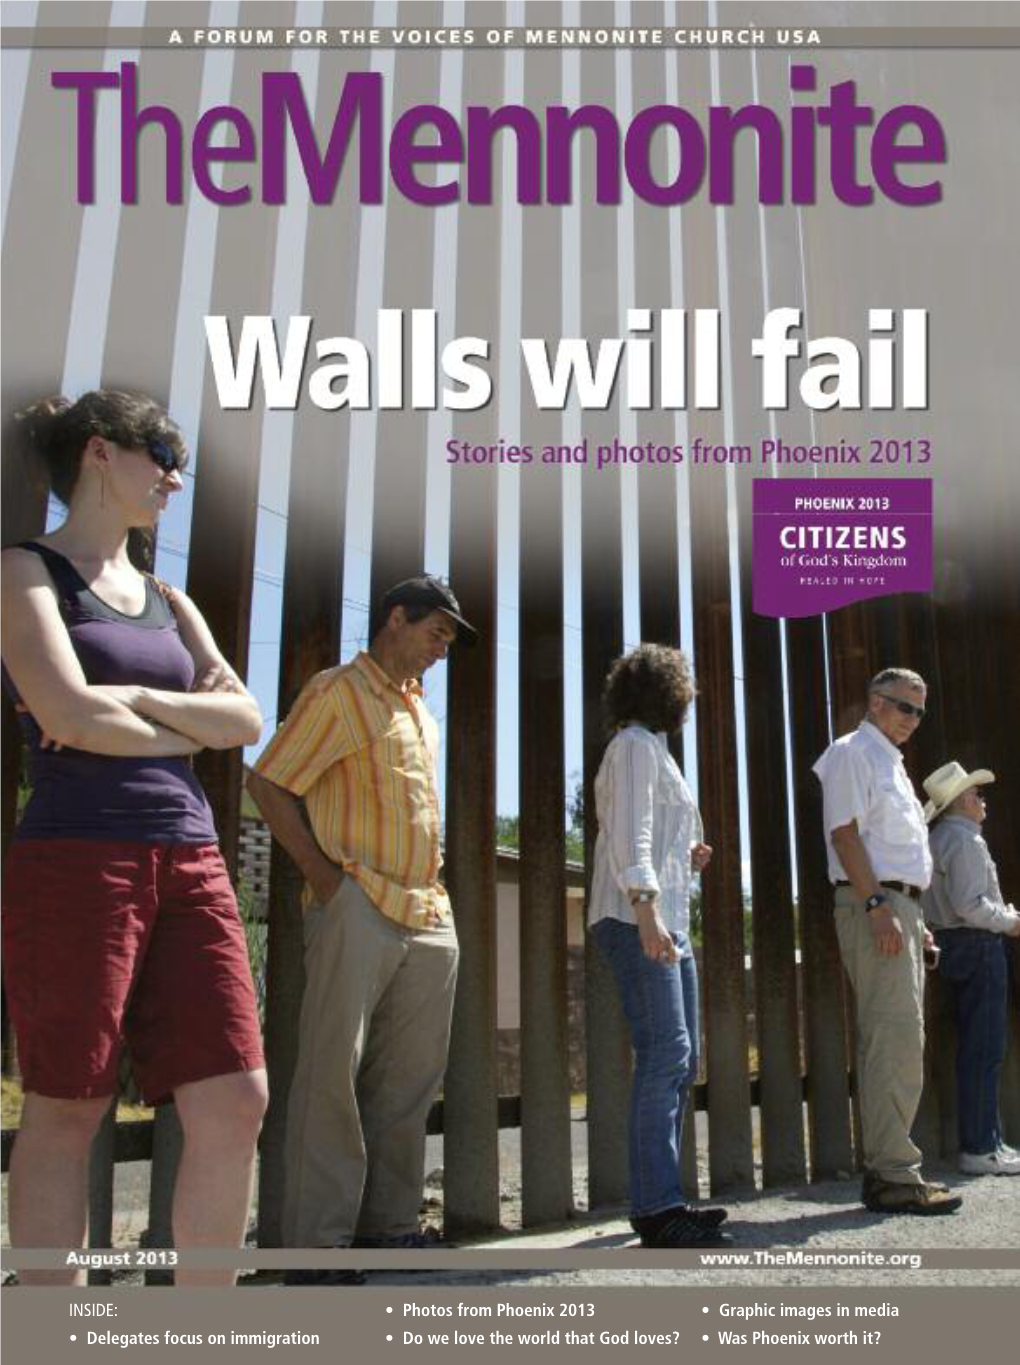 Mennonite Church USA 6 40 33 Opinion 56 Editorial on the COVER: Photo by Jonathan Charles at the U.S.-Mexico Border Wall